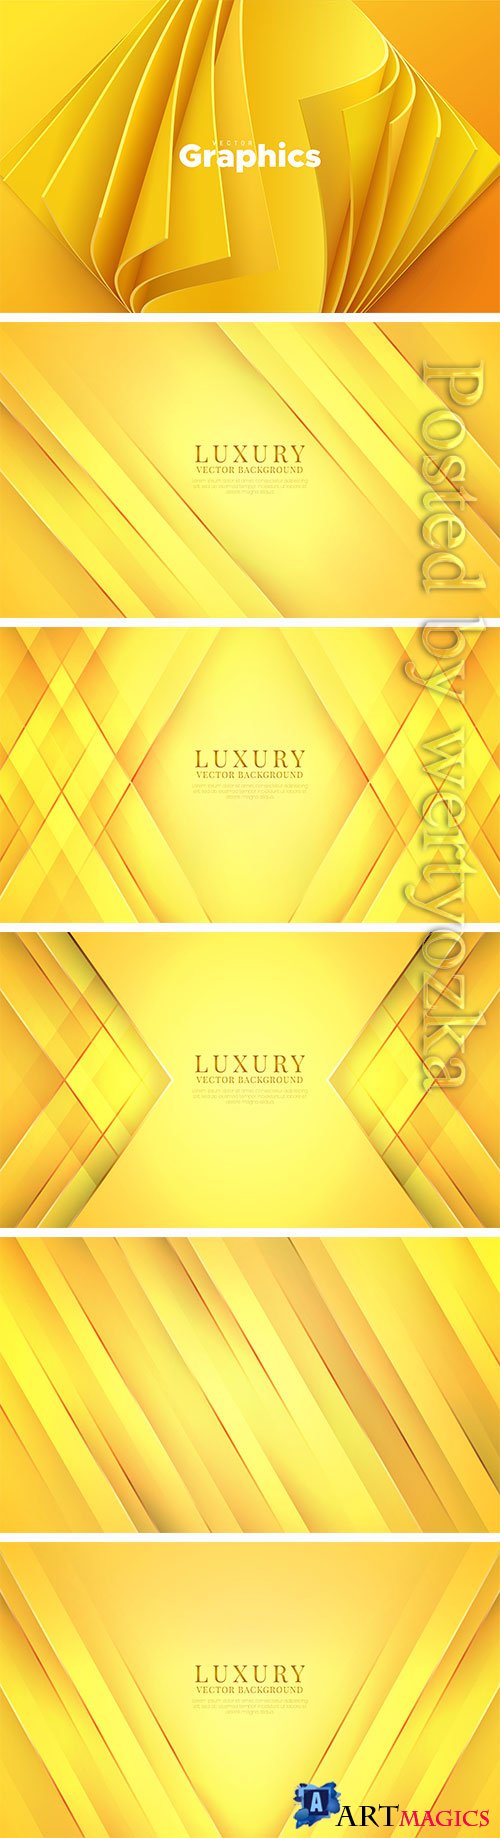 Yellow abstract backgrounds with golden lines in vector